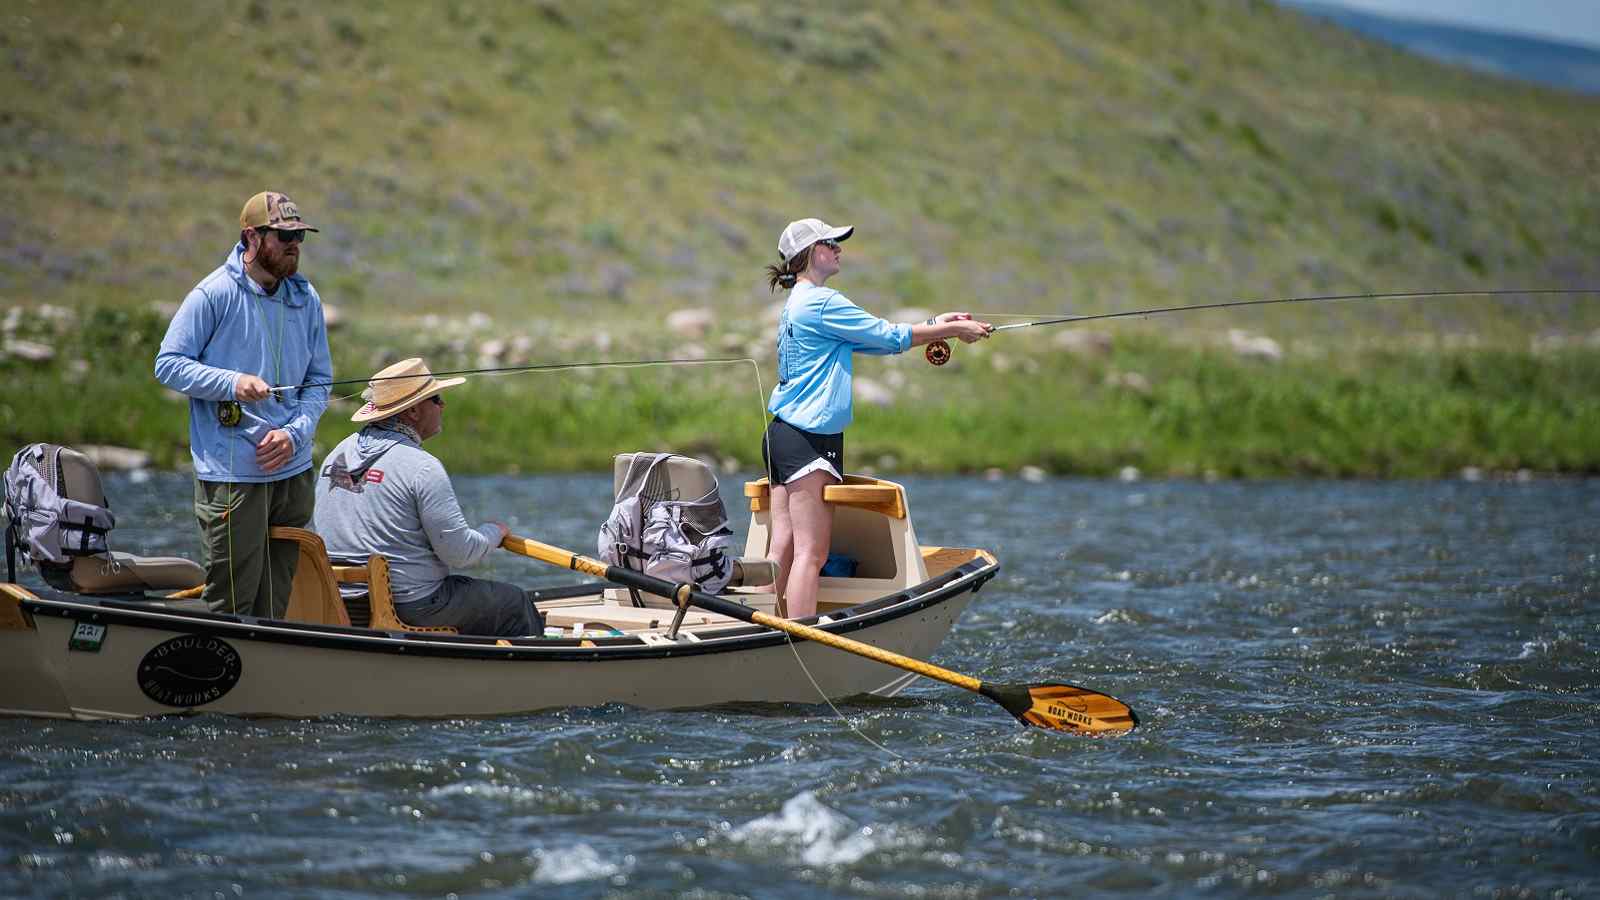 A Tackle Shop guide steers a boat down a river while a man and a woman fly fish during a summer trip.